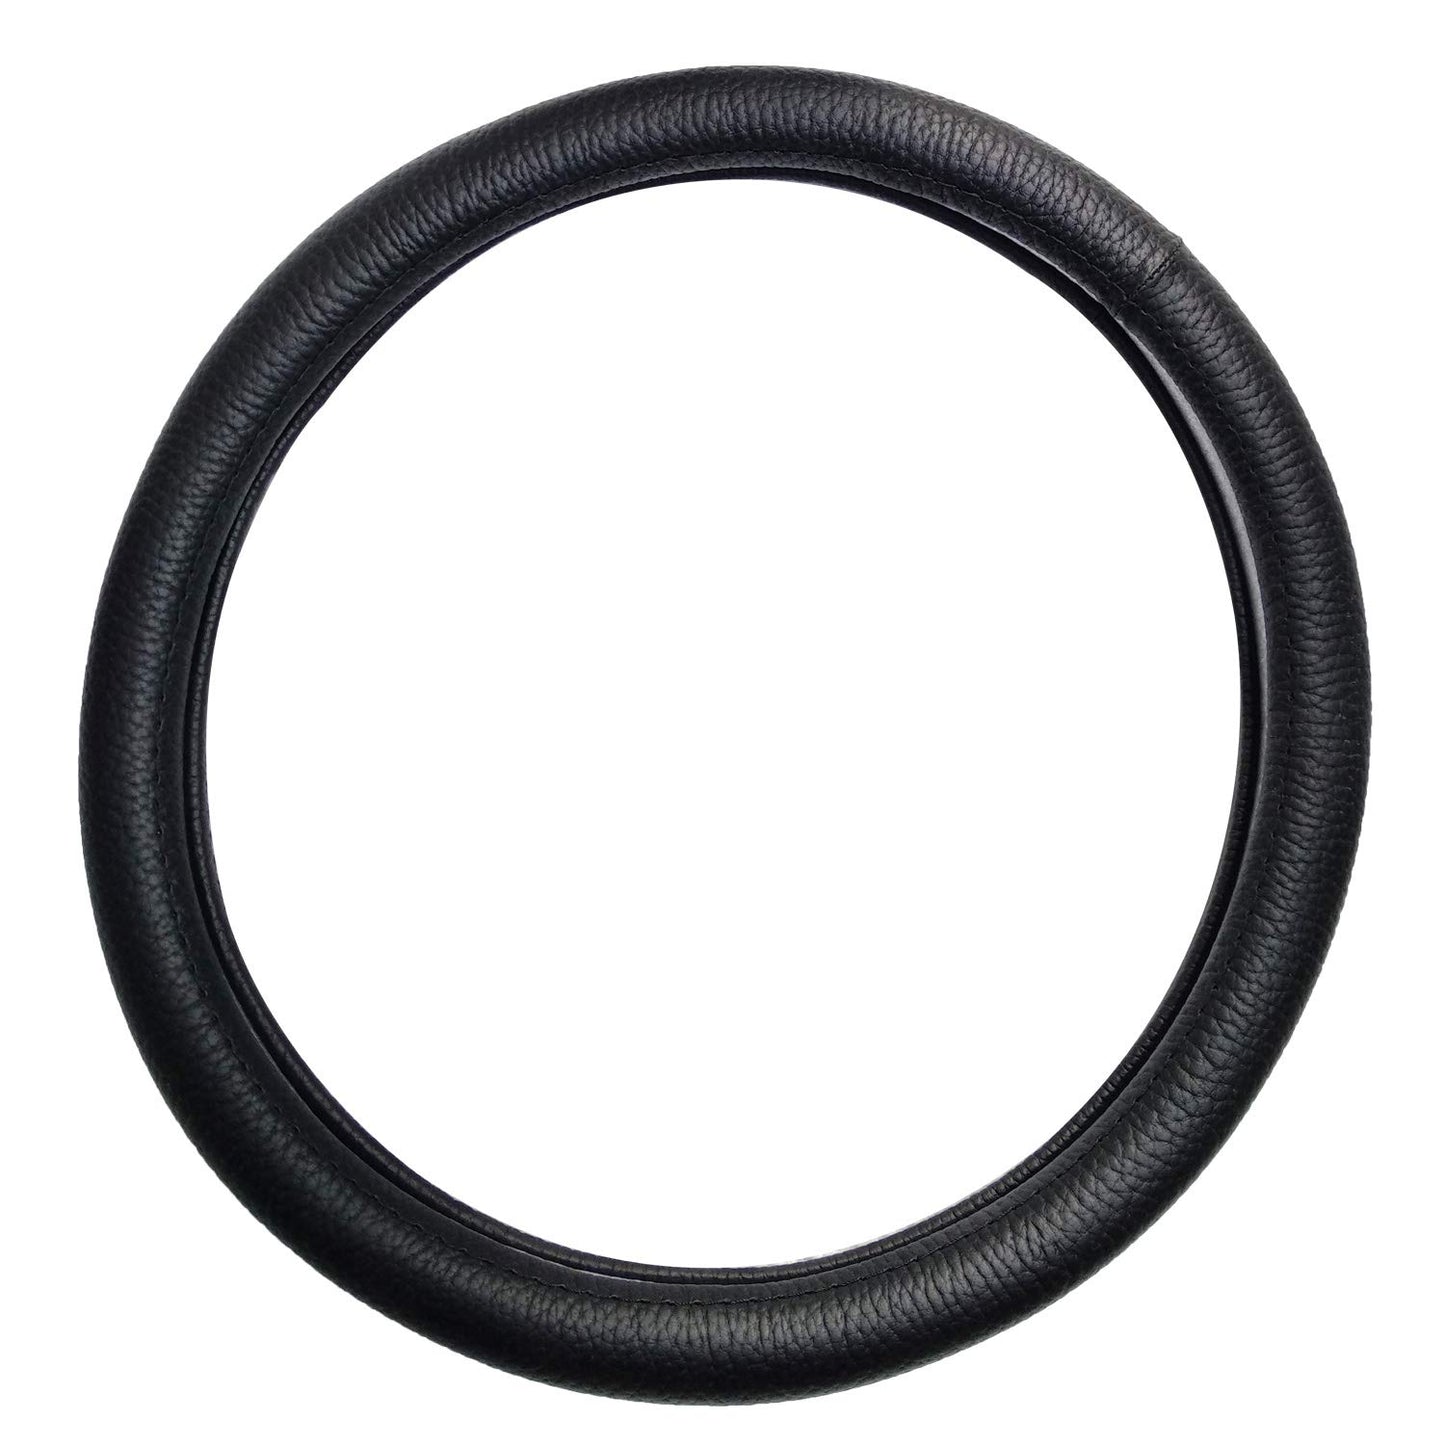 Oshotto Artificial Leather SC-14 Car Steering Cover for All Cars (Black)